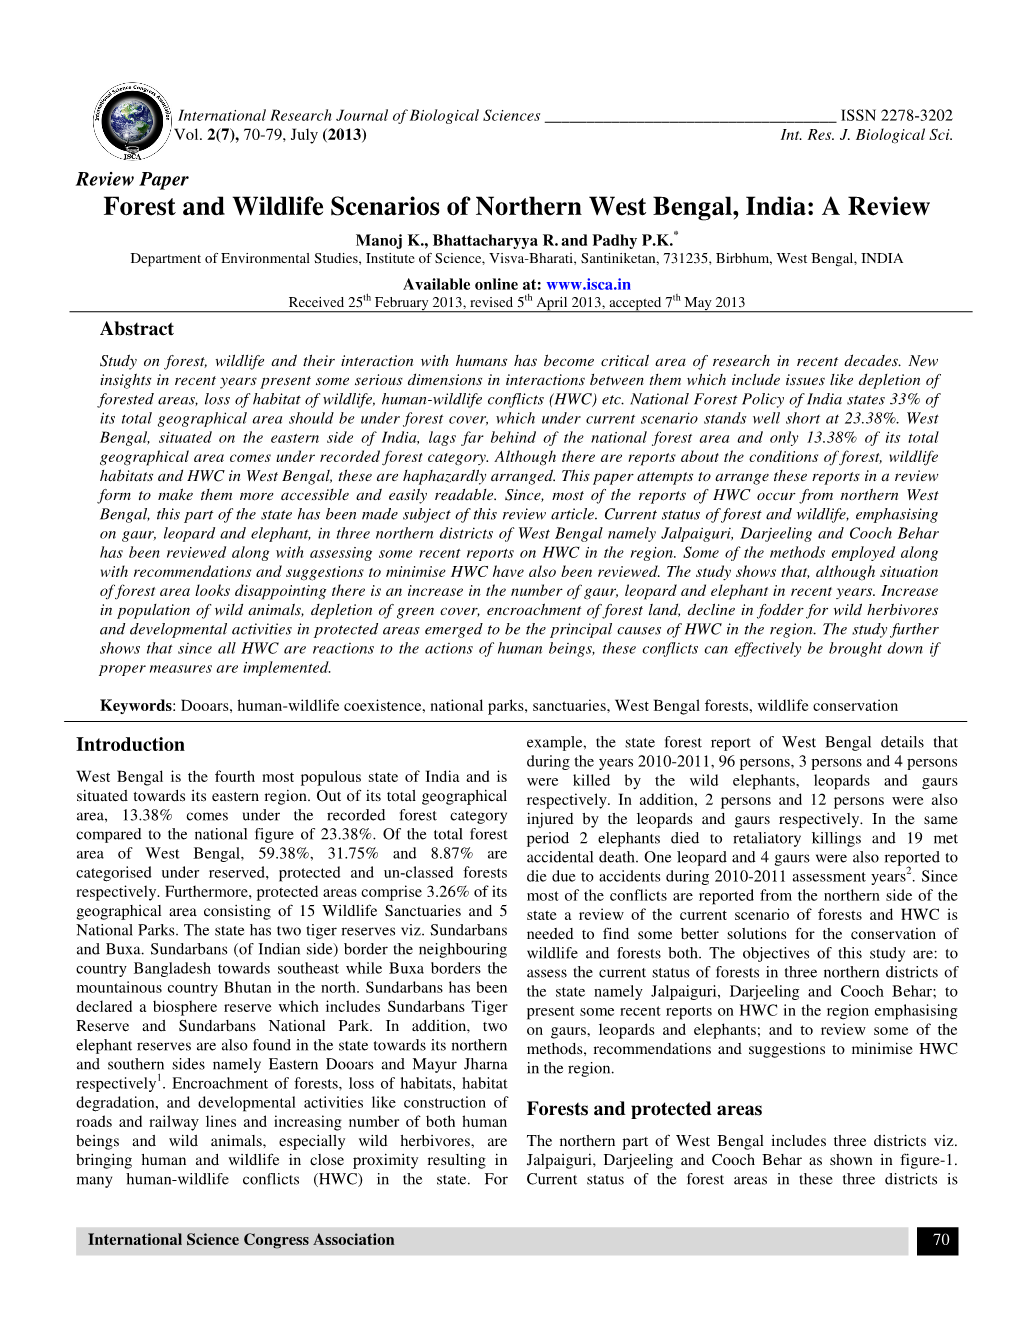 Forest and Wildlife Scenarios of Northern West Bengal, India: a Review